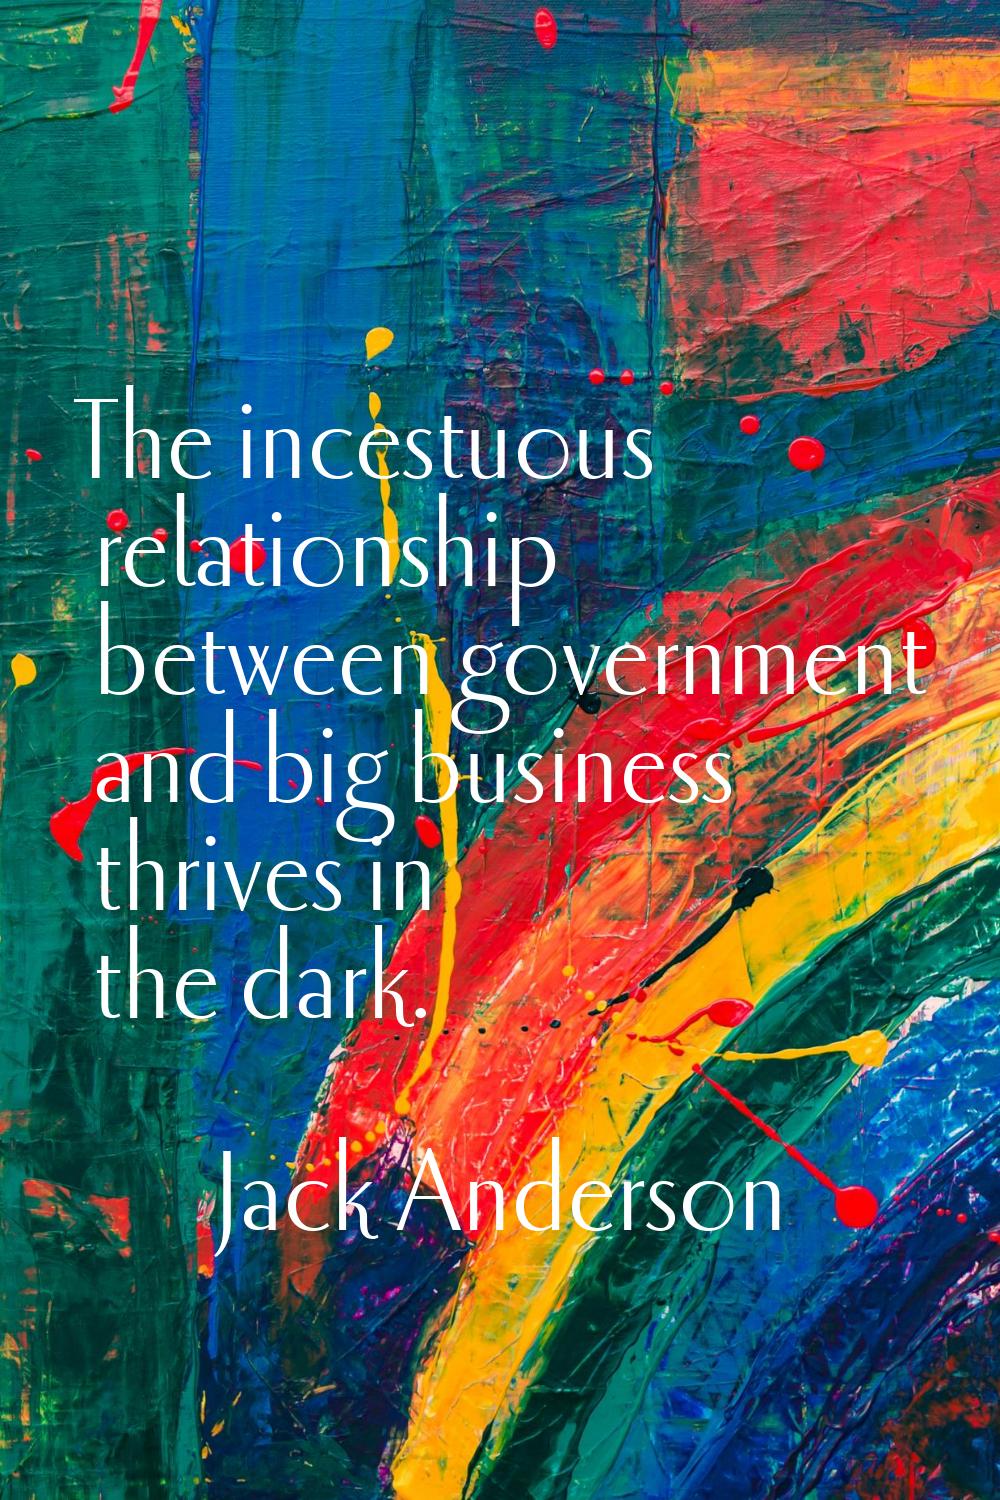 The incestuous relationship between government and big business thrives in the dark.